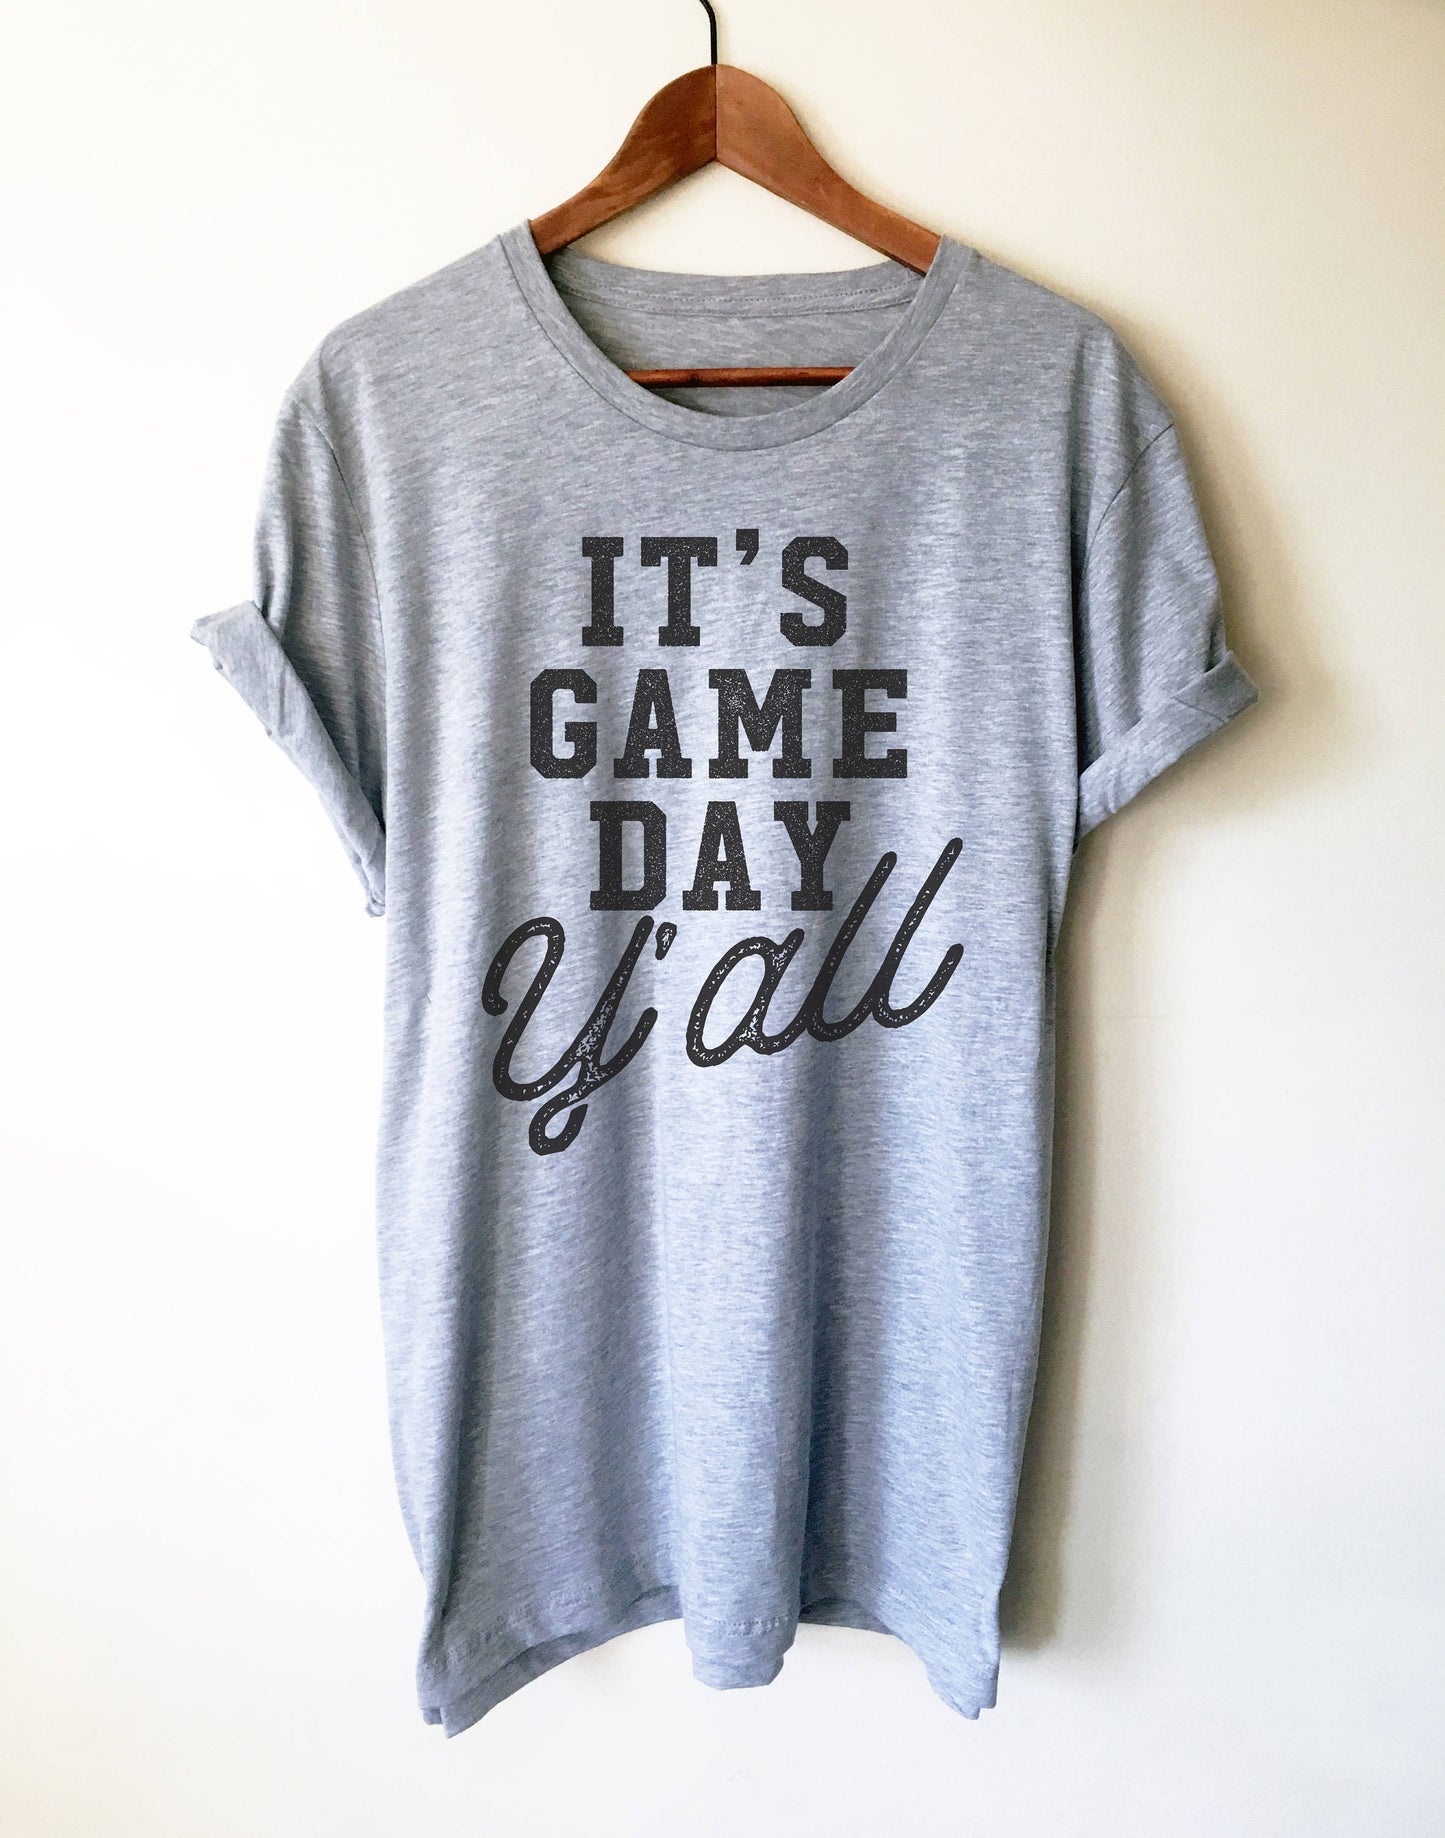 It's Game Day Y'all Unisex Shirt - Game Day Shirt, Football Shirt, Tailgating Shirt, Football Season, Basketball Gameday, Gameday Tees, Fan